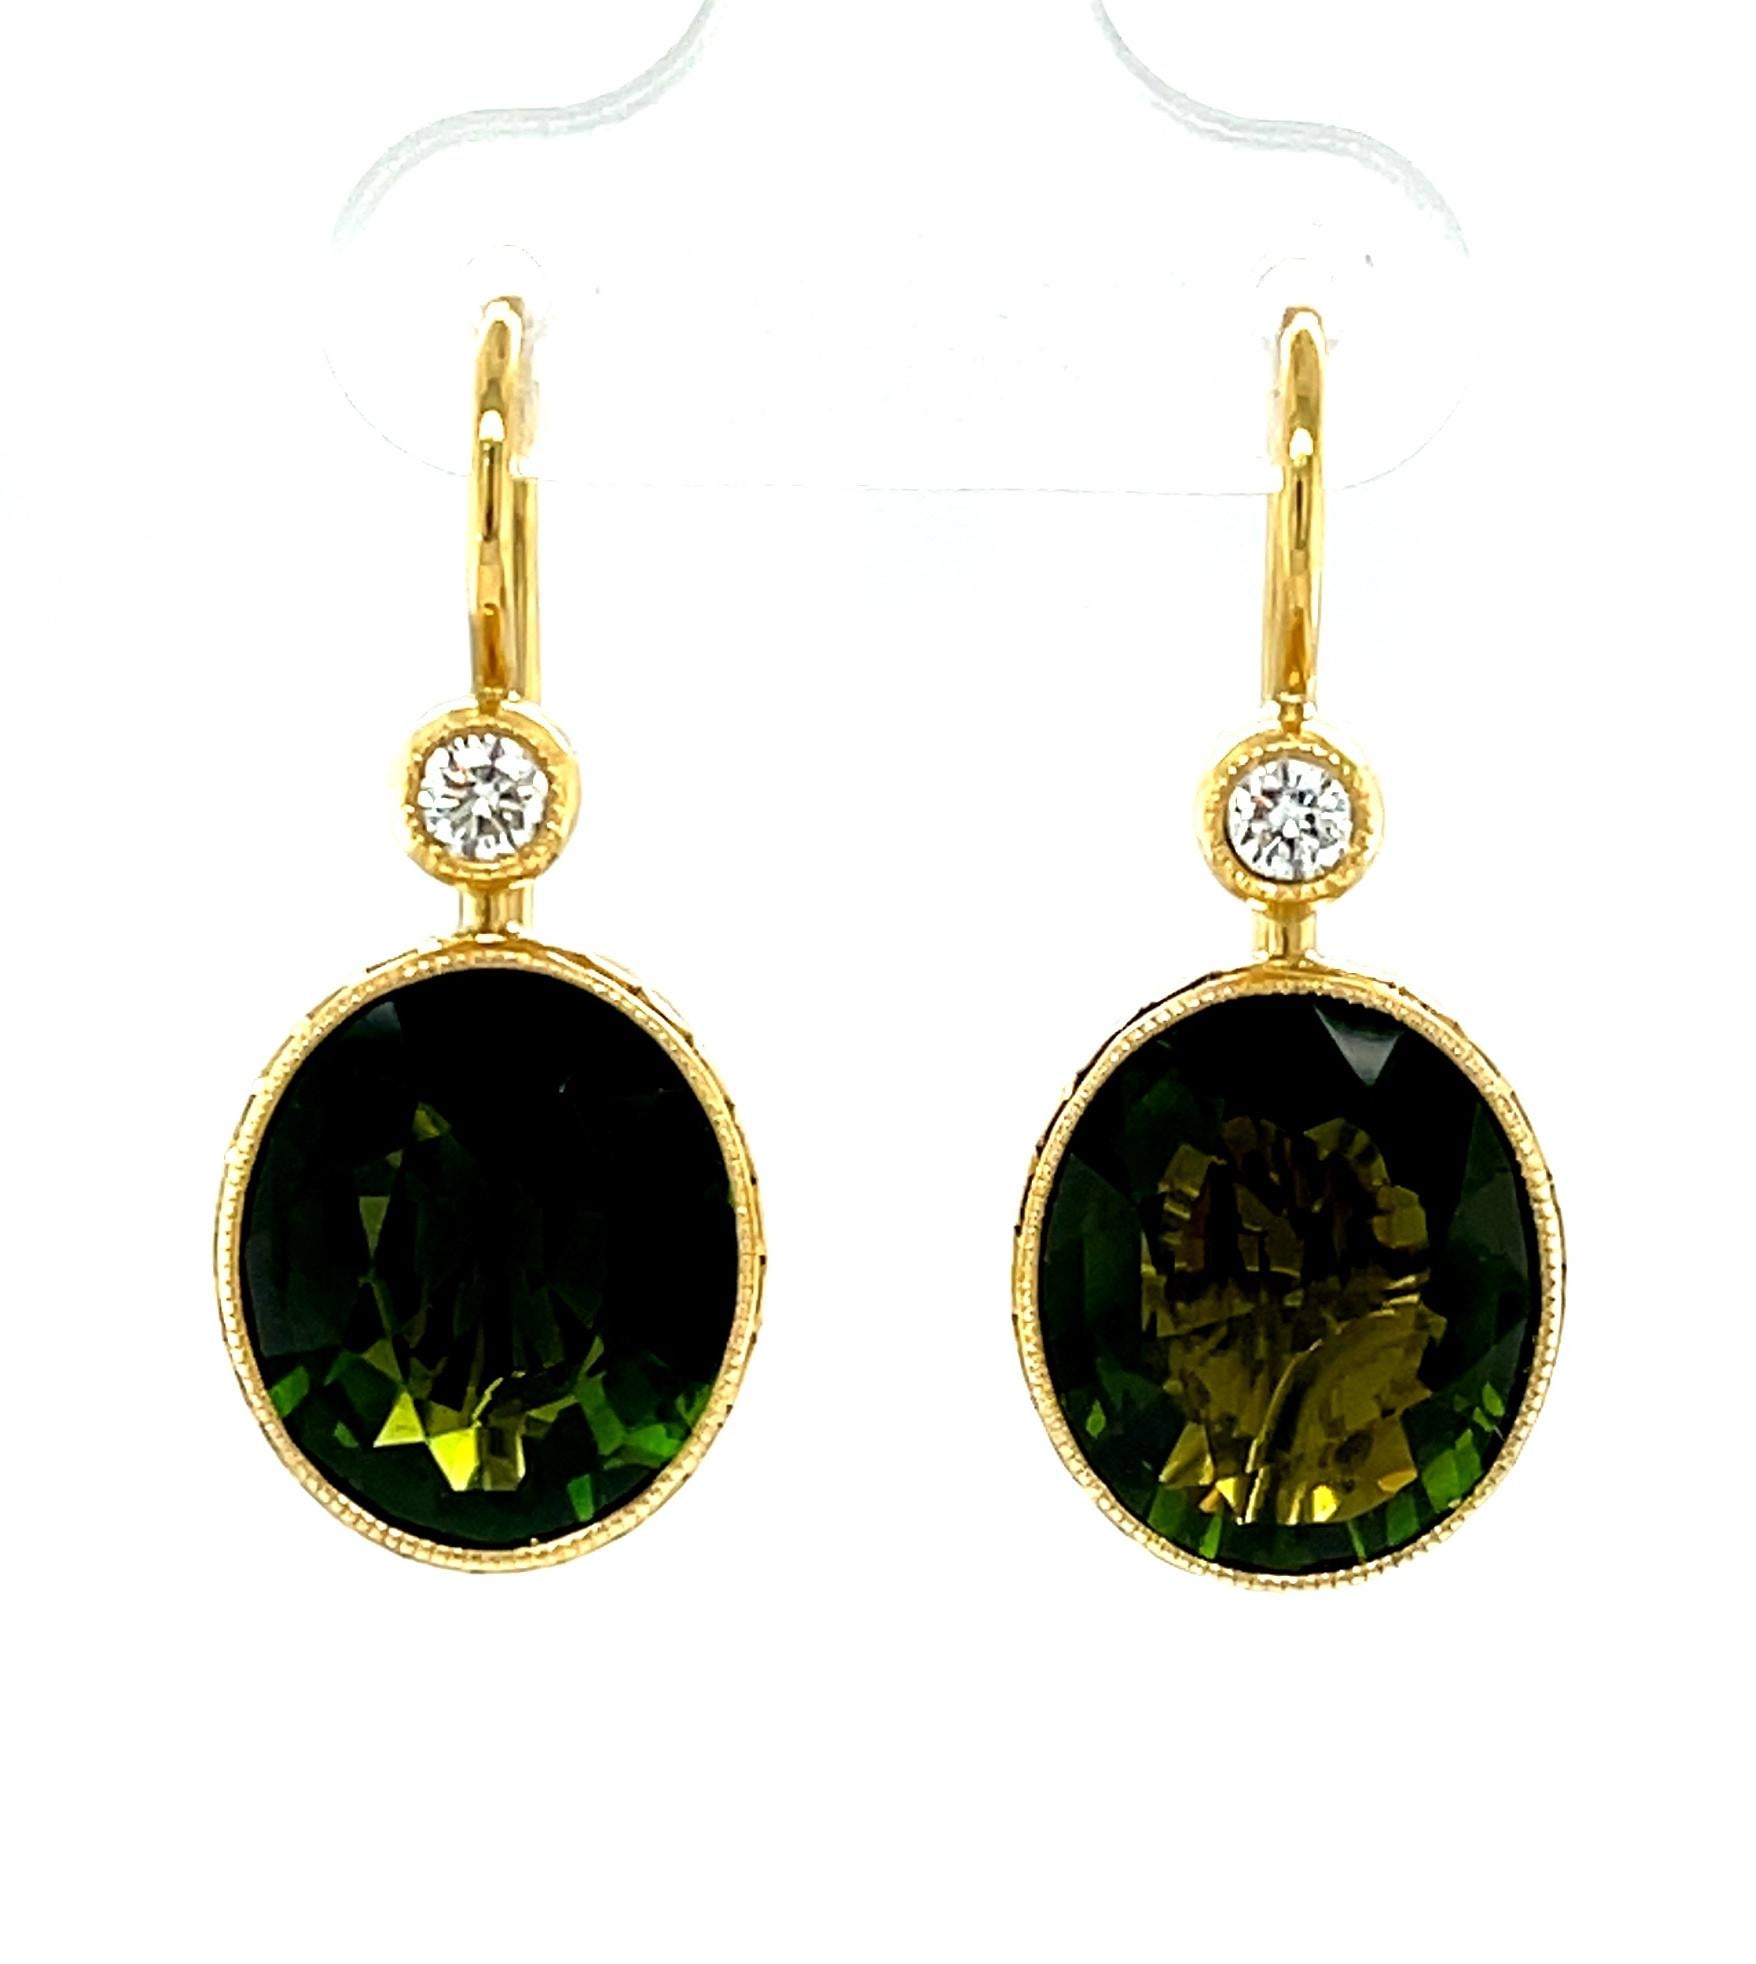 These pretty dangling earrings will add a great finishing touch to any outfit!  Large, richly colored,  olive green tourmaline ovals are bezel set in 18k yellow gold and dangle from bezel set round sparkling diamonds for a look that transitions